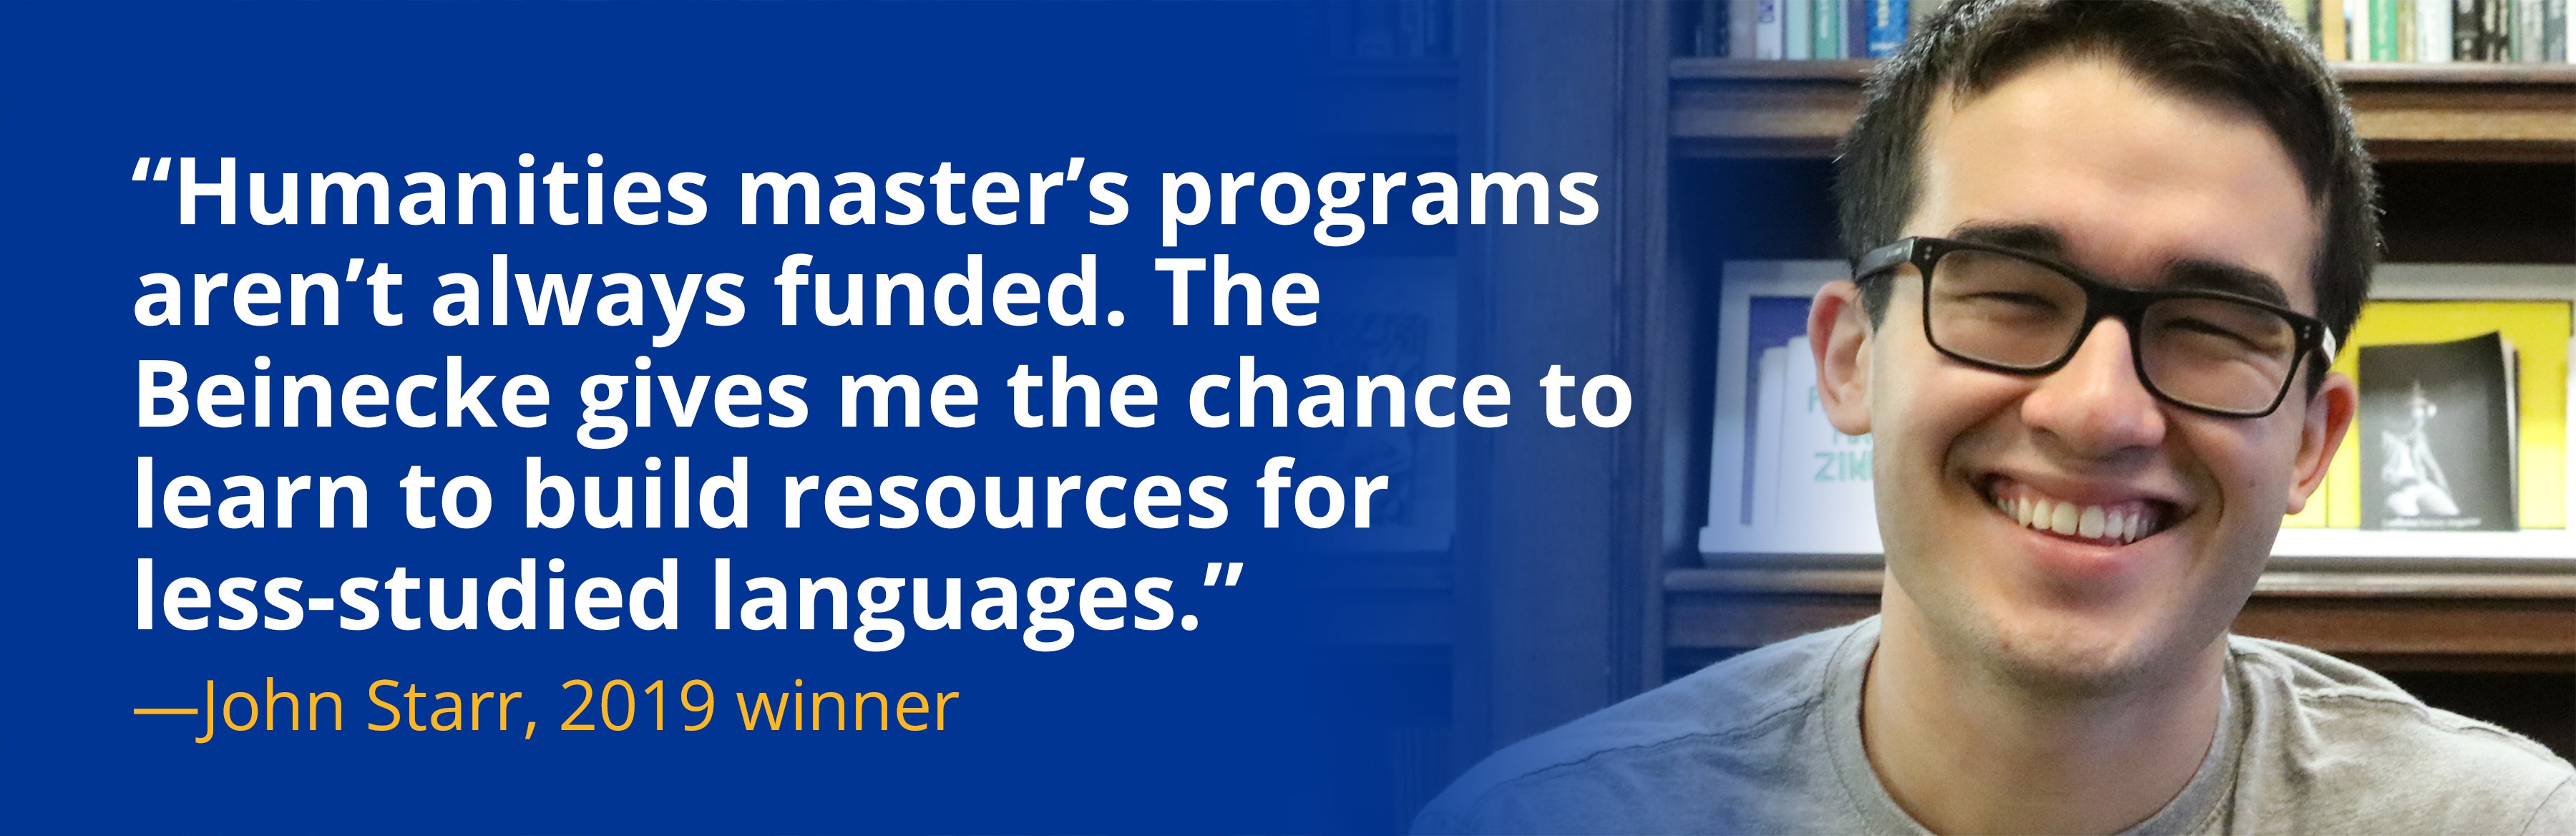 Quote from John Starr, “Humanities master’s programs aren’t always funded. The Beinecke gives me the chance to learn to build resources for less-studied languages”